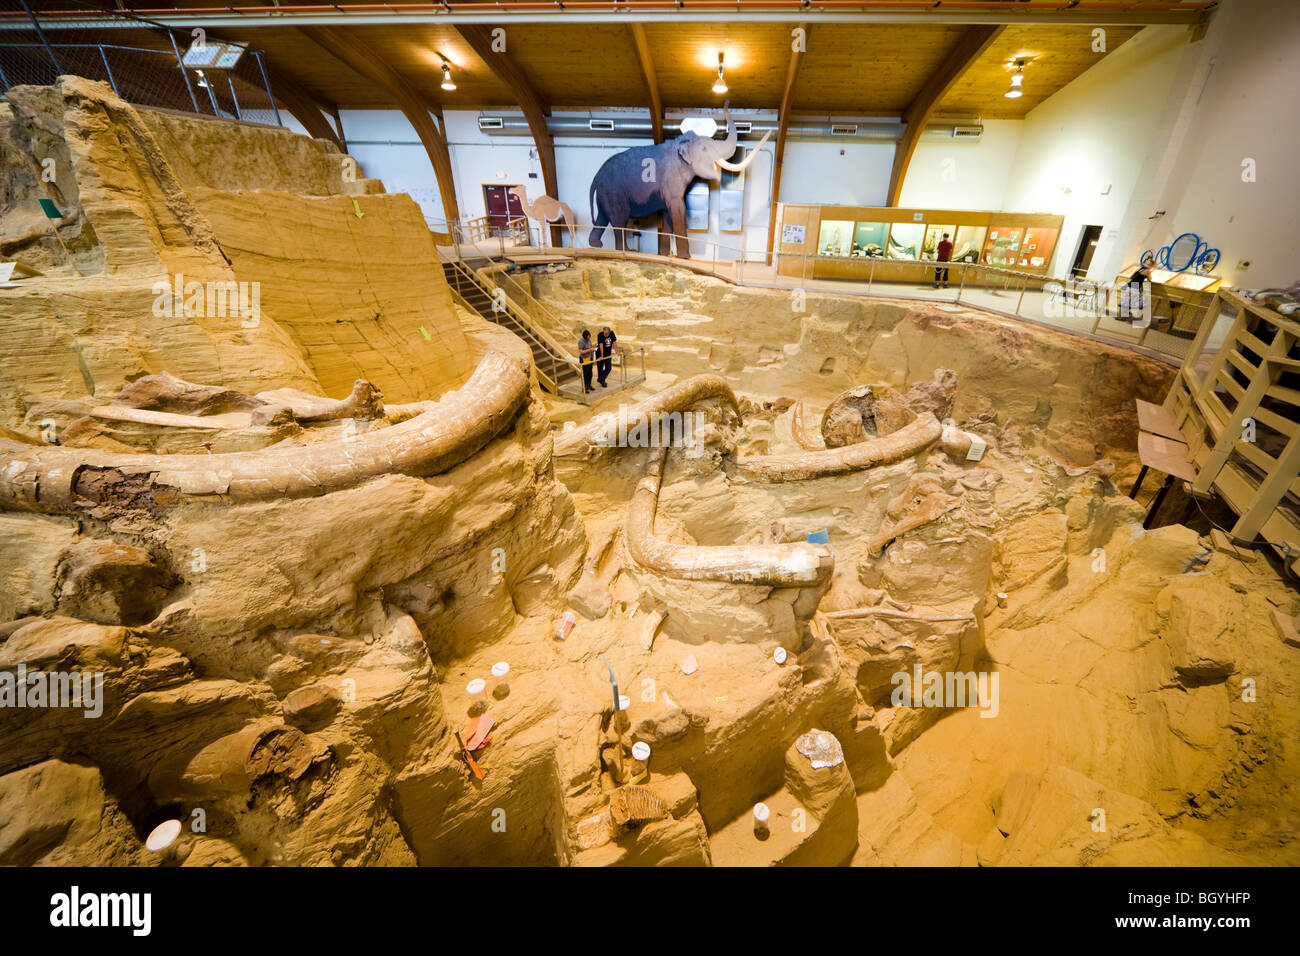 The Mammoth Site Museum, Hot Springs SD. Visitors looking into the bonebed with mammoth bones tusks fossils in paleontology dig. Stock Photo